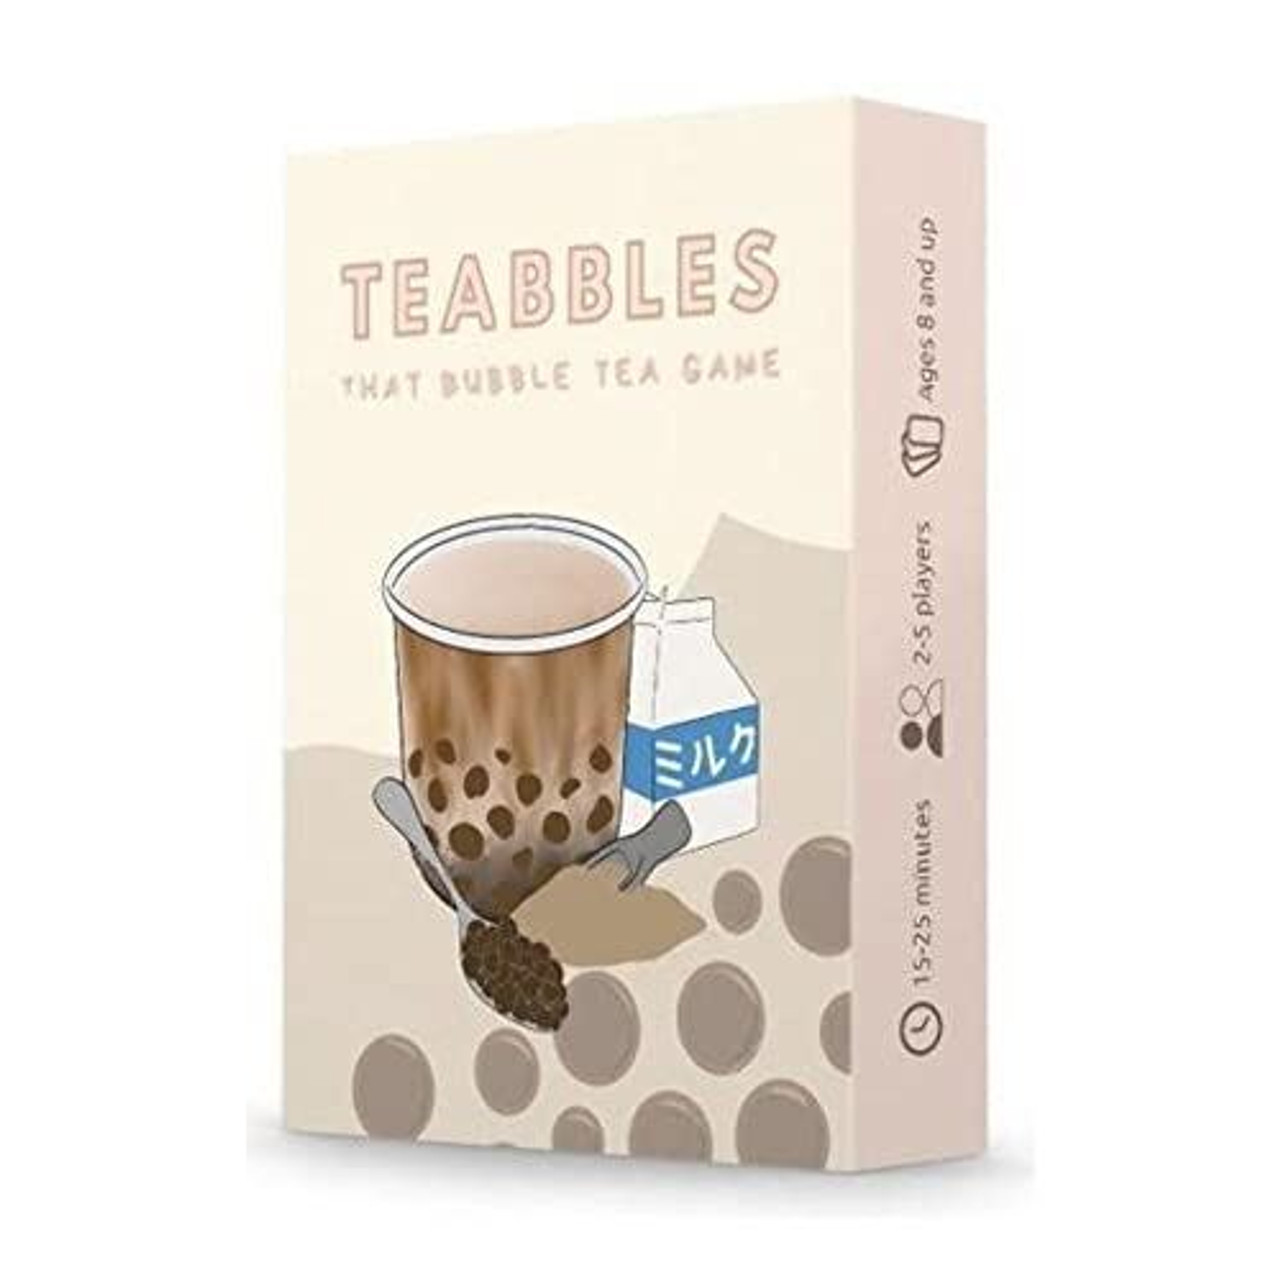 Teabbles Board Game